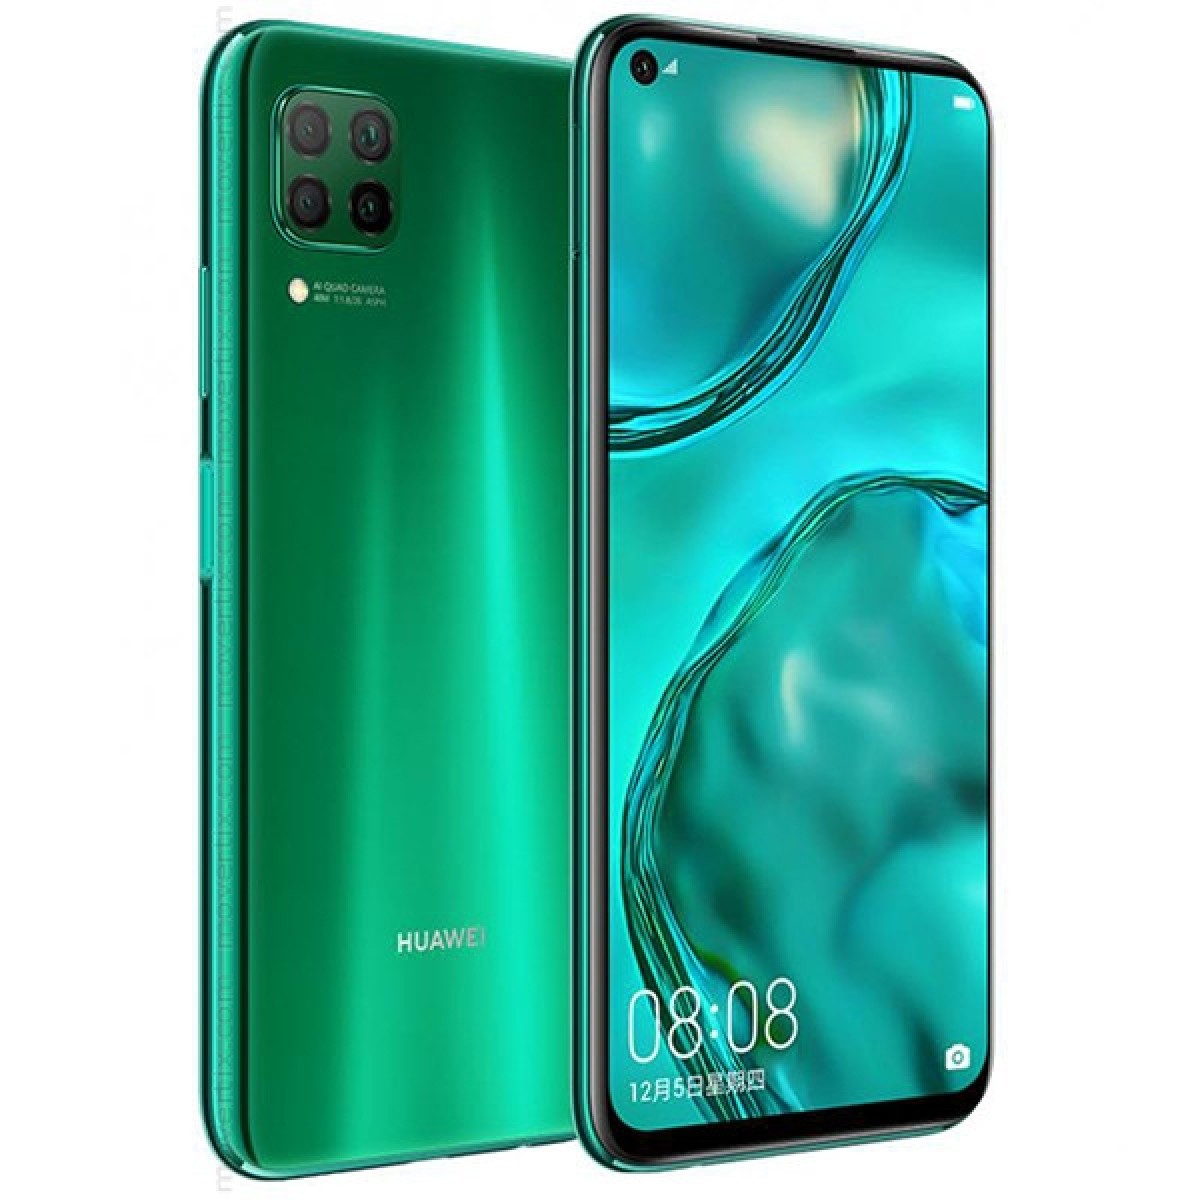 Huawei P40 comes with 48 MP back camera and 6.4 Inch Display